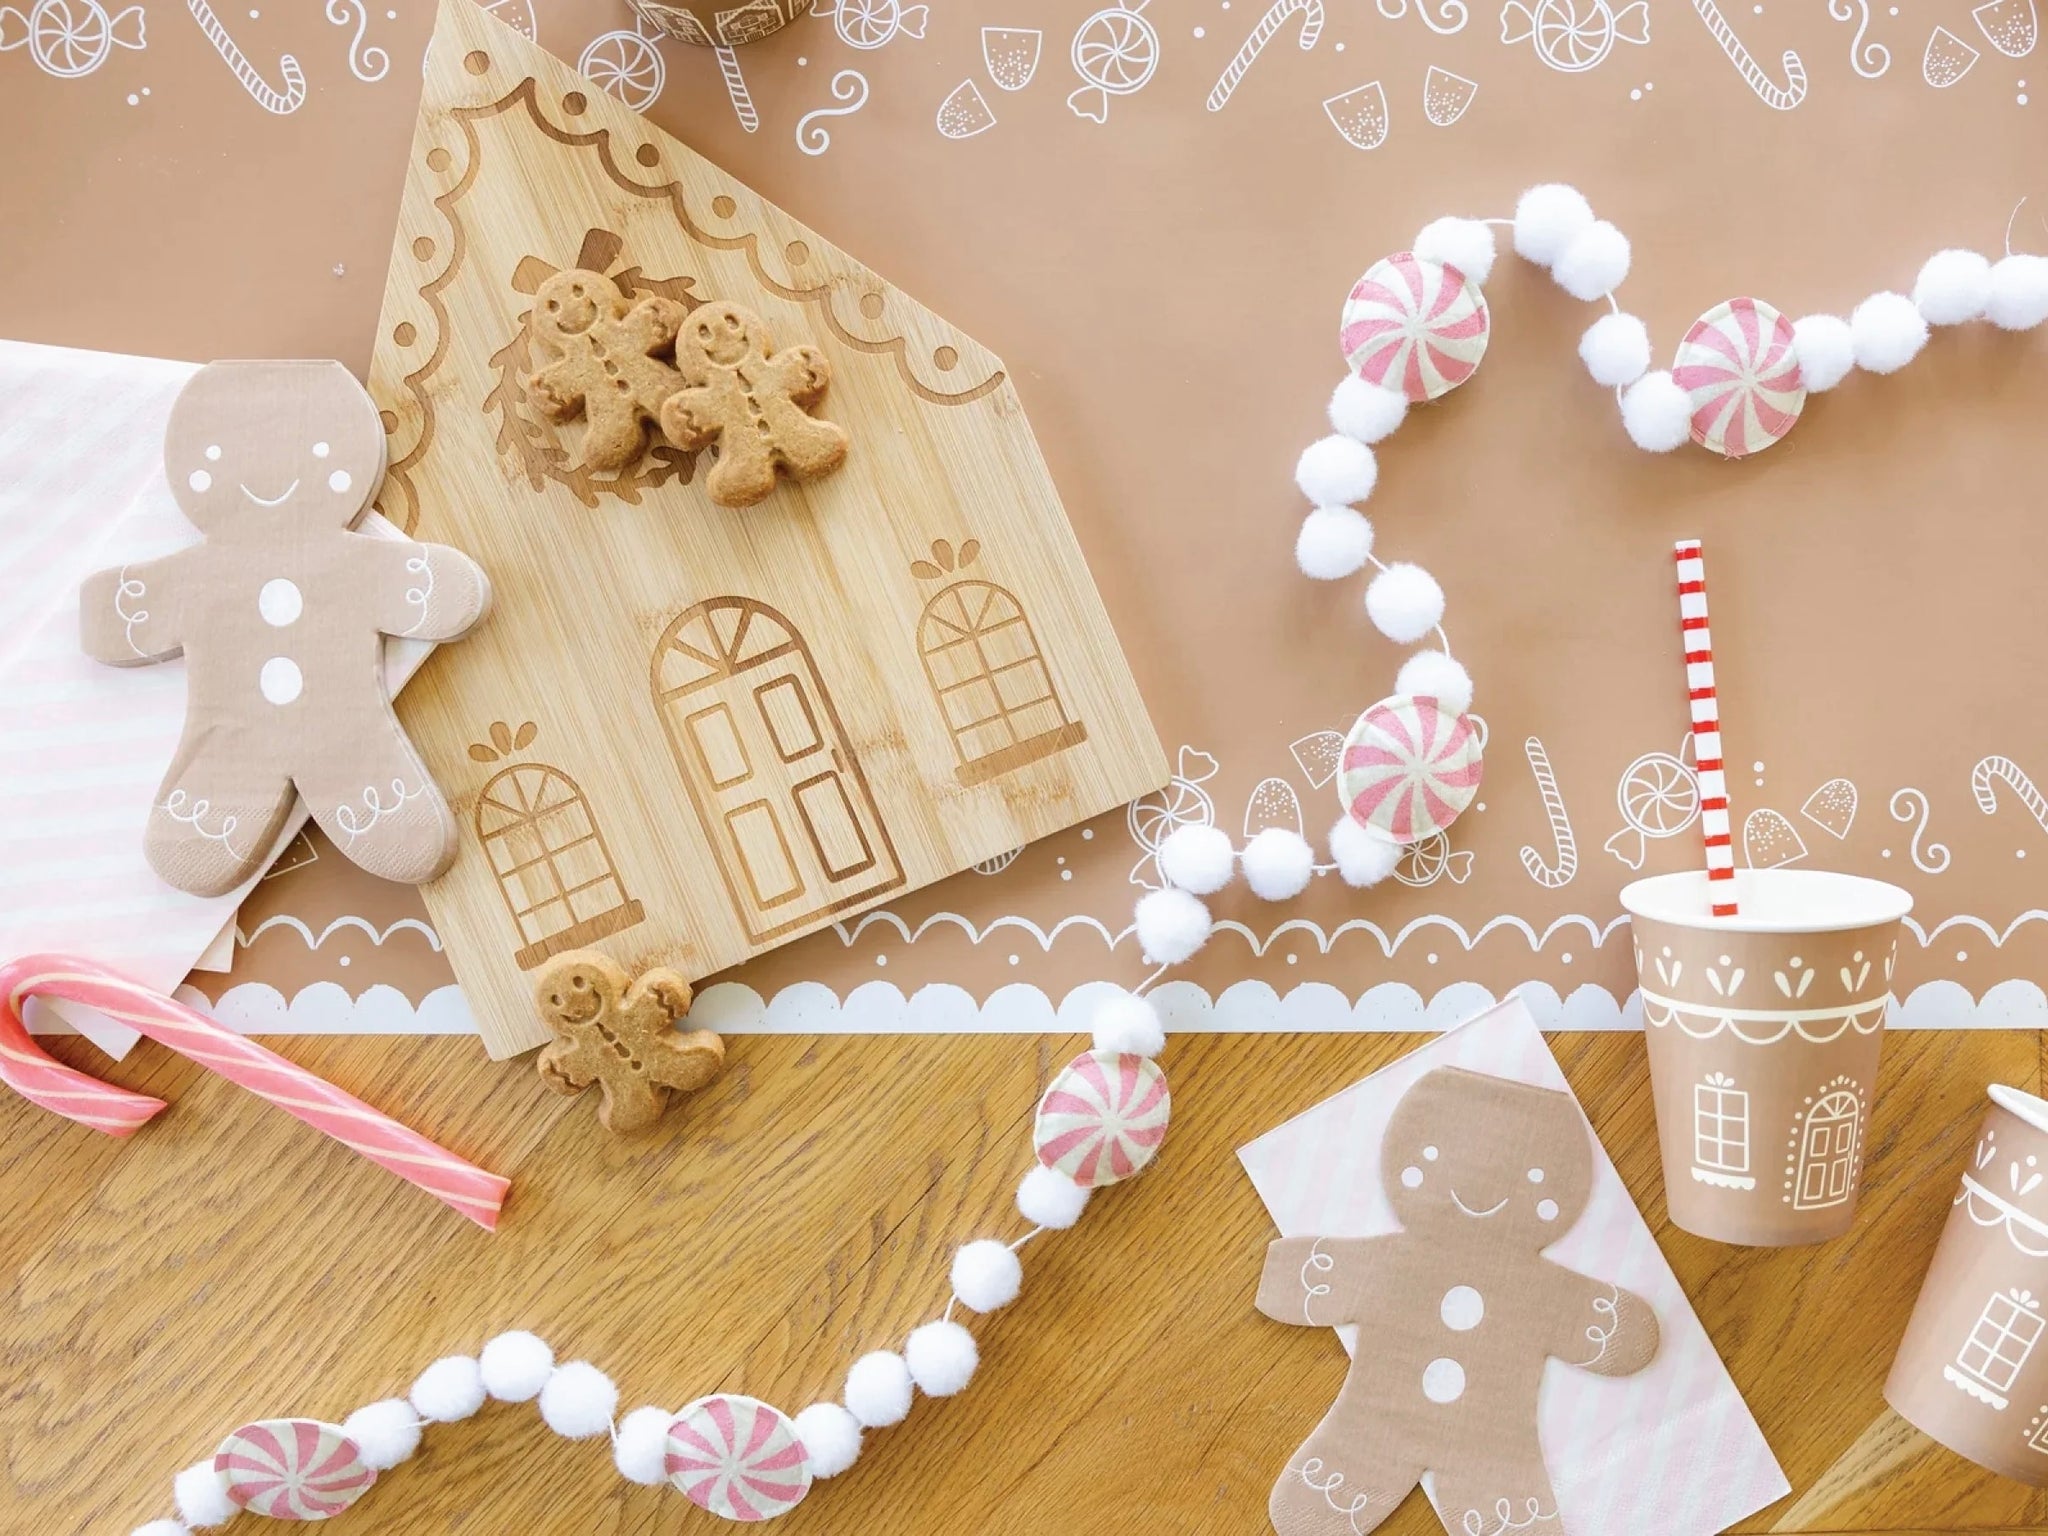 Gingerbread House Decorating Party | The Party Darling